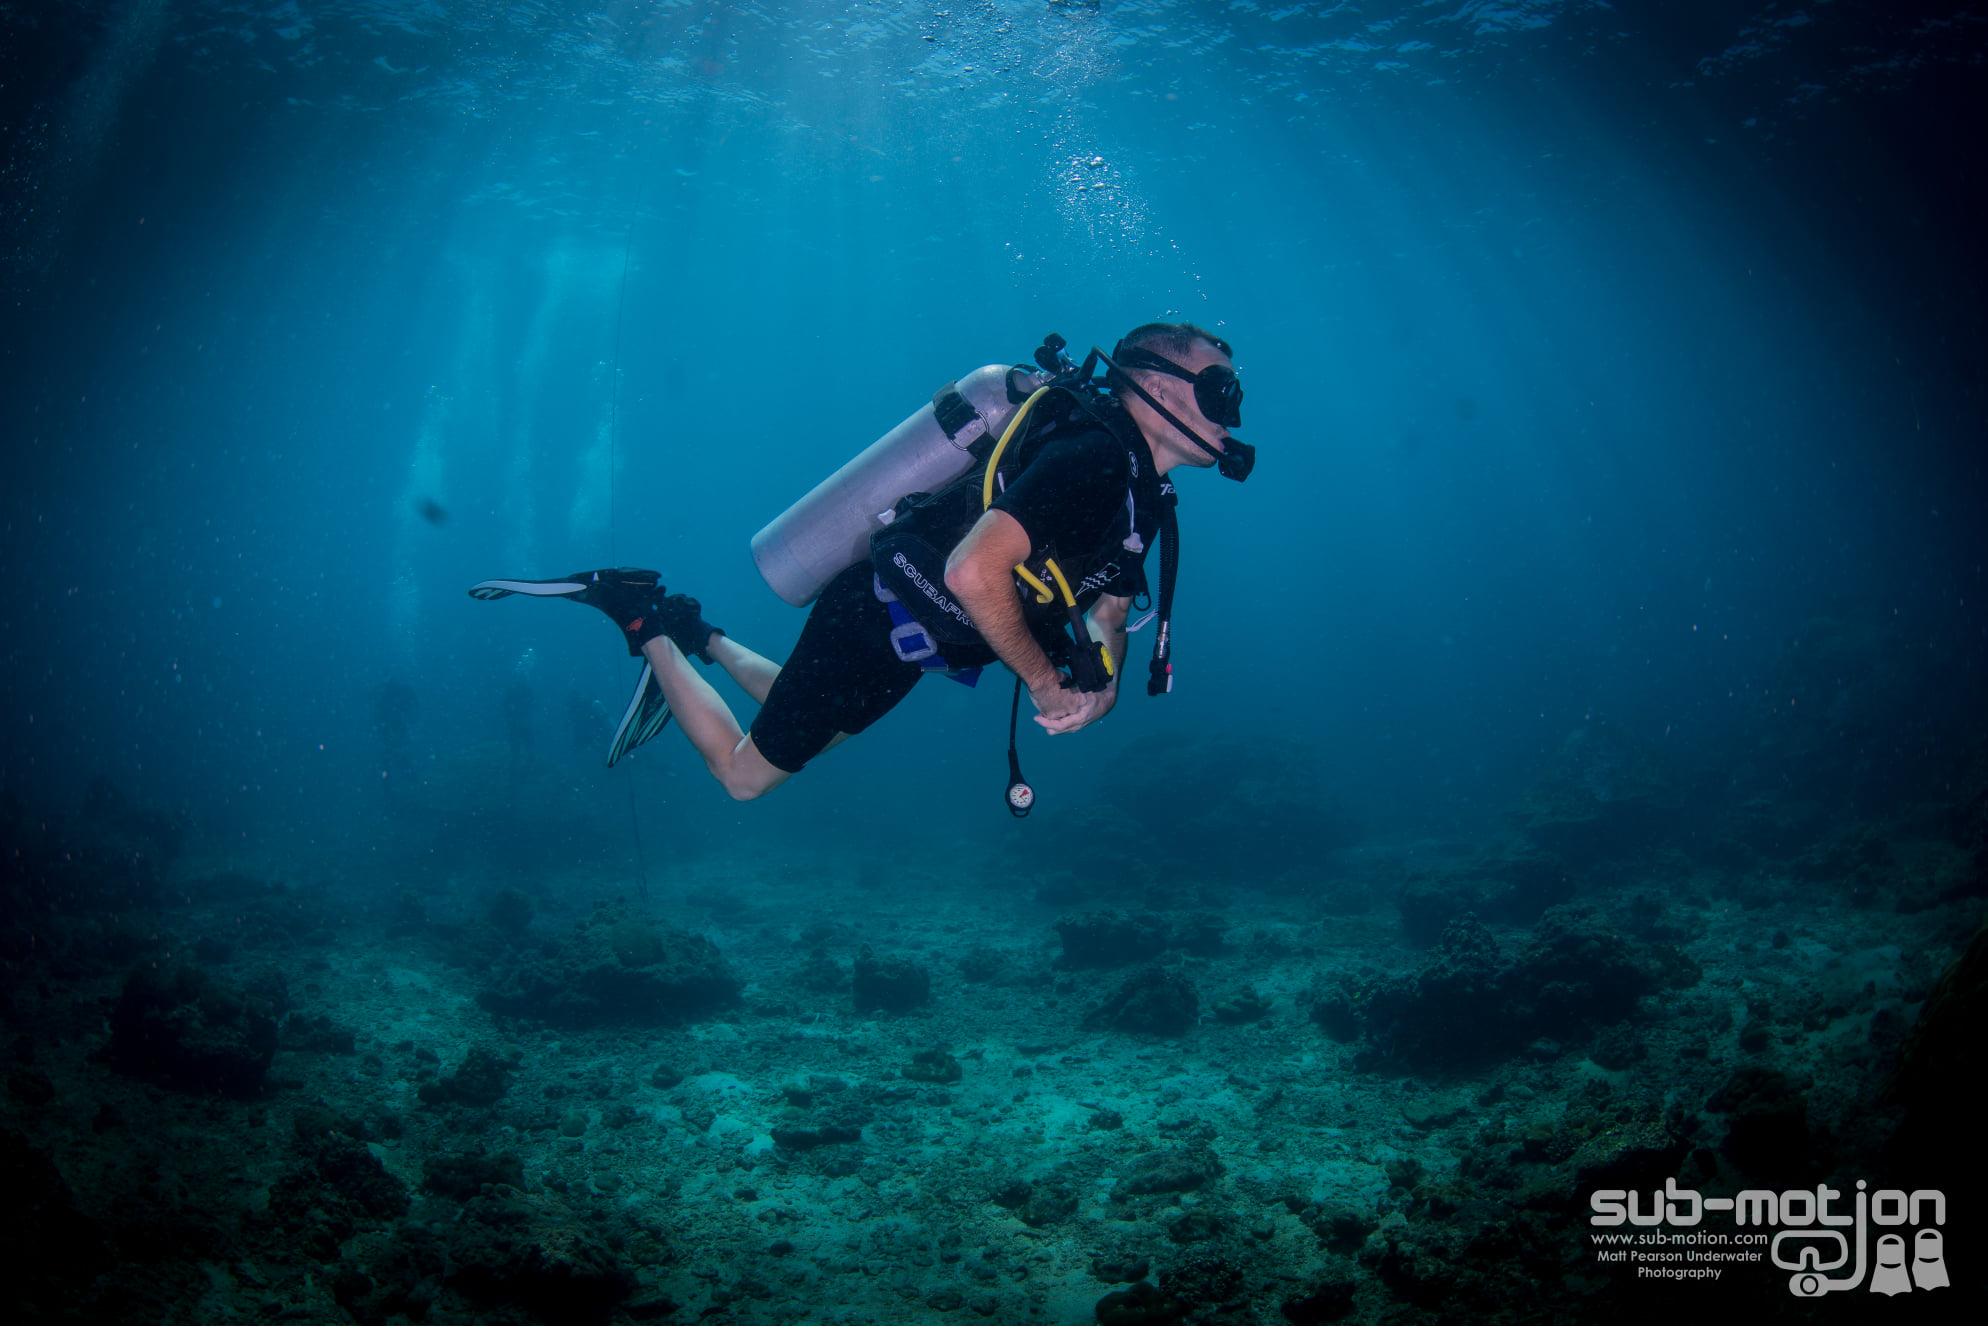 open water diver course and certification program in koh lanta